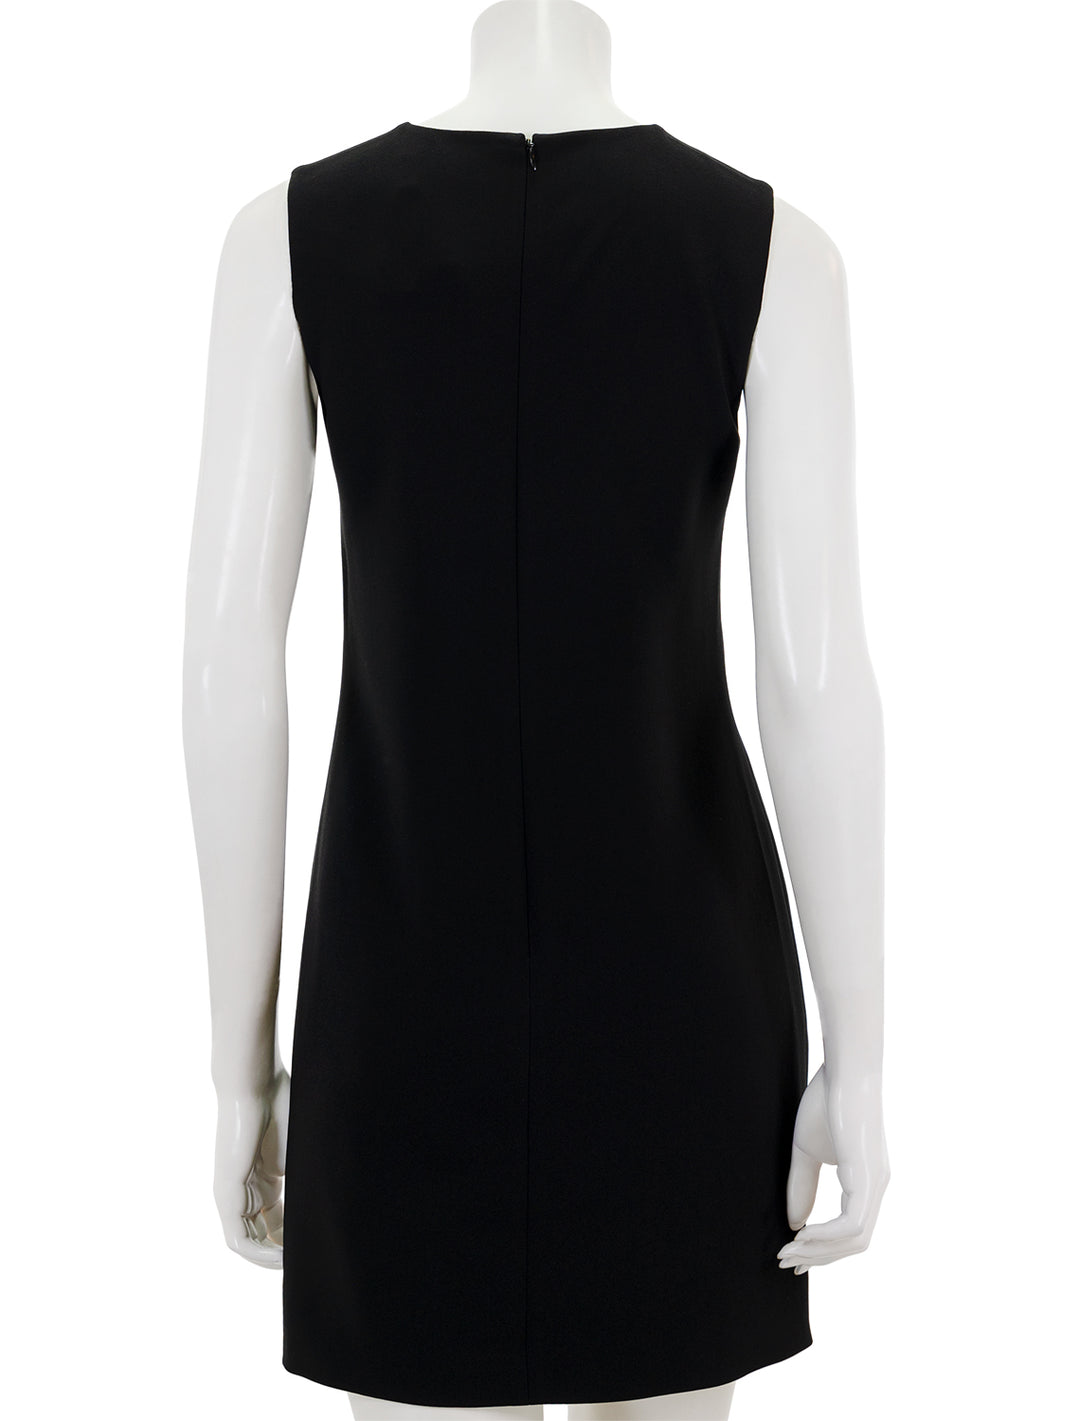 Back view of Theory's the effortless shiftdress in admirable crepe black.